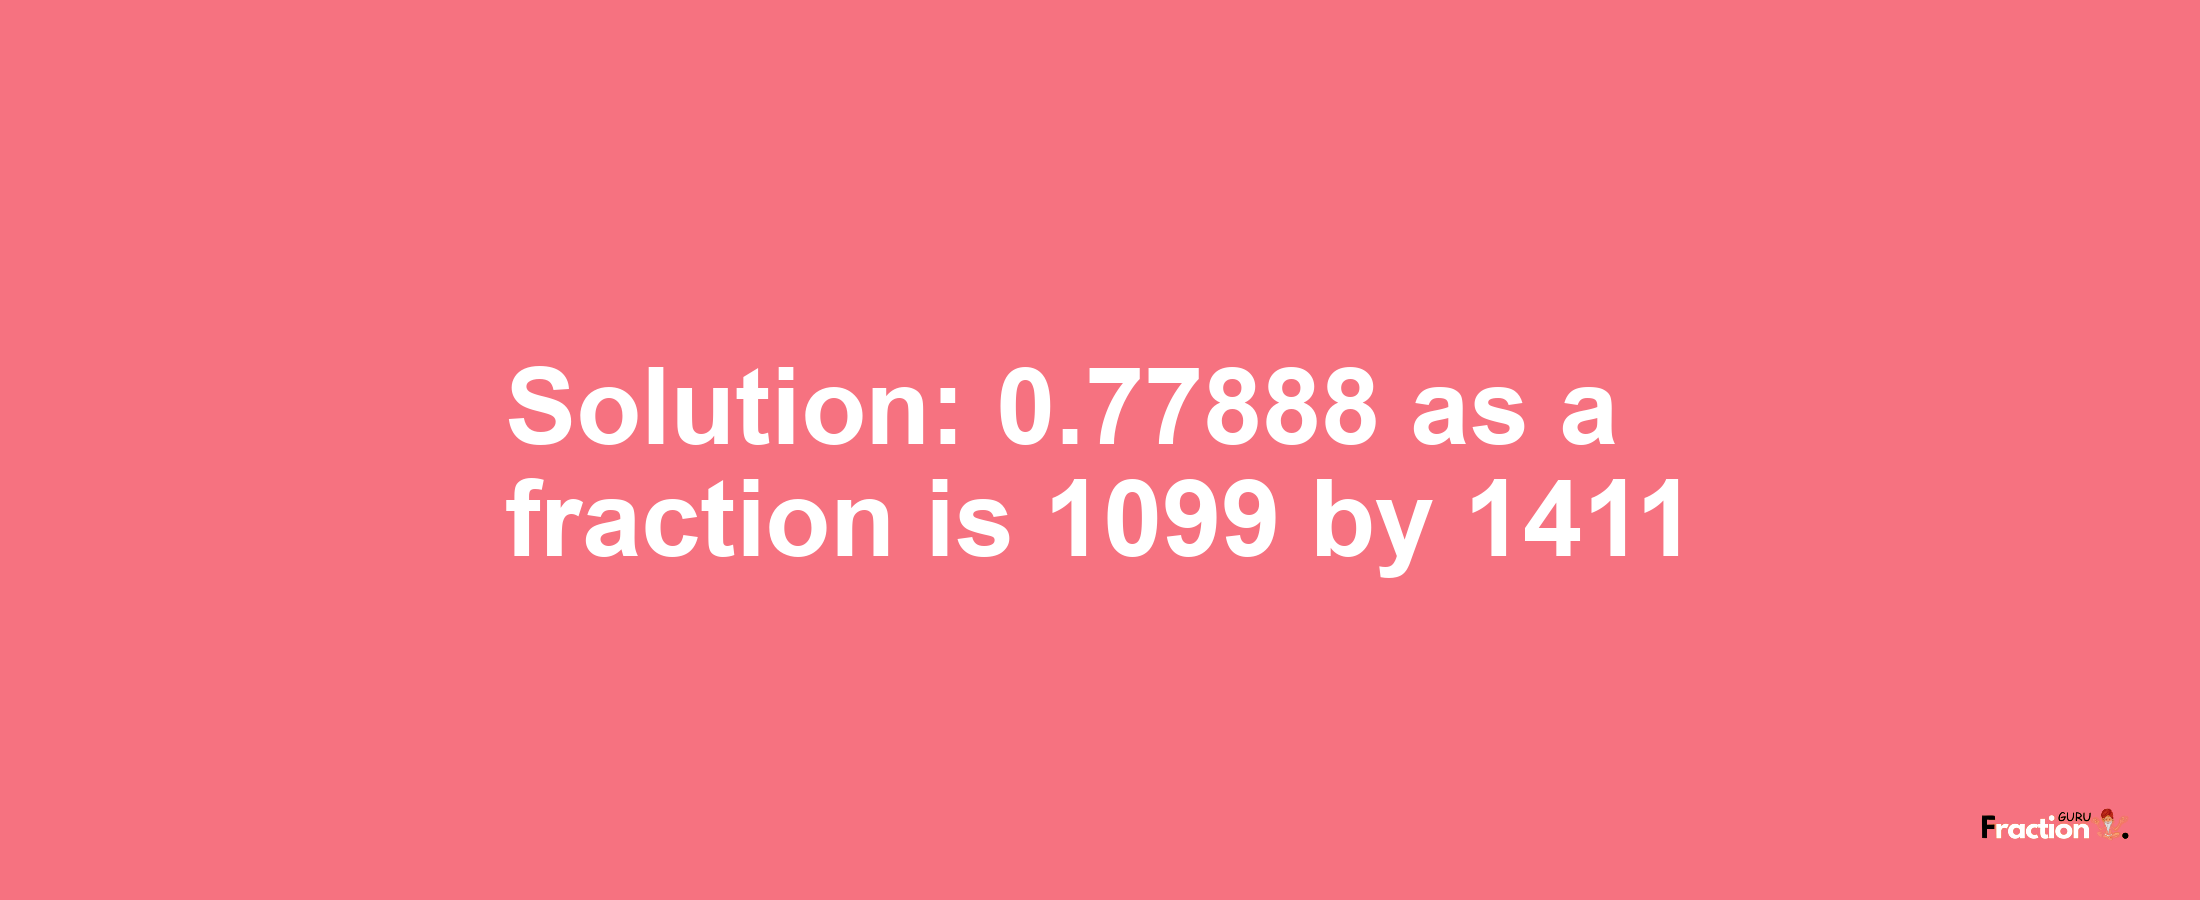 Solution:0.77888 as a fraction is 1099/1411